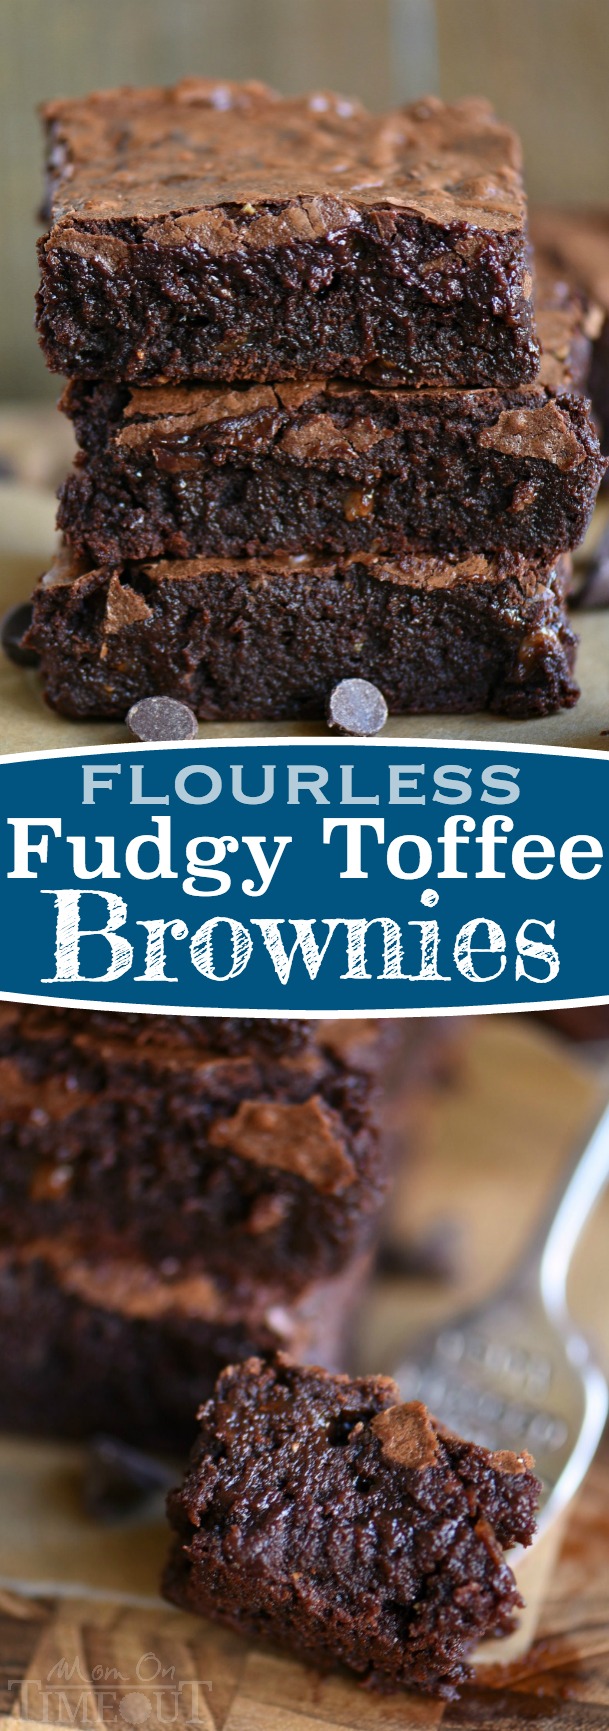 The BEST brownies I've ever had and they just happen to be naturally gluten free! Made without any flour, these Fudgy Toffee Flourless Brownies are naturally gluten free and are going to blow you away! So rich, so fudgy, and absolutely BURSTING with rich, chocolate flavor! A secret ingredient is the key! // Mom On Timeout